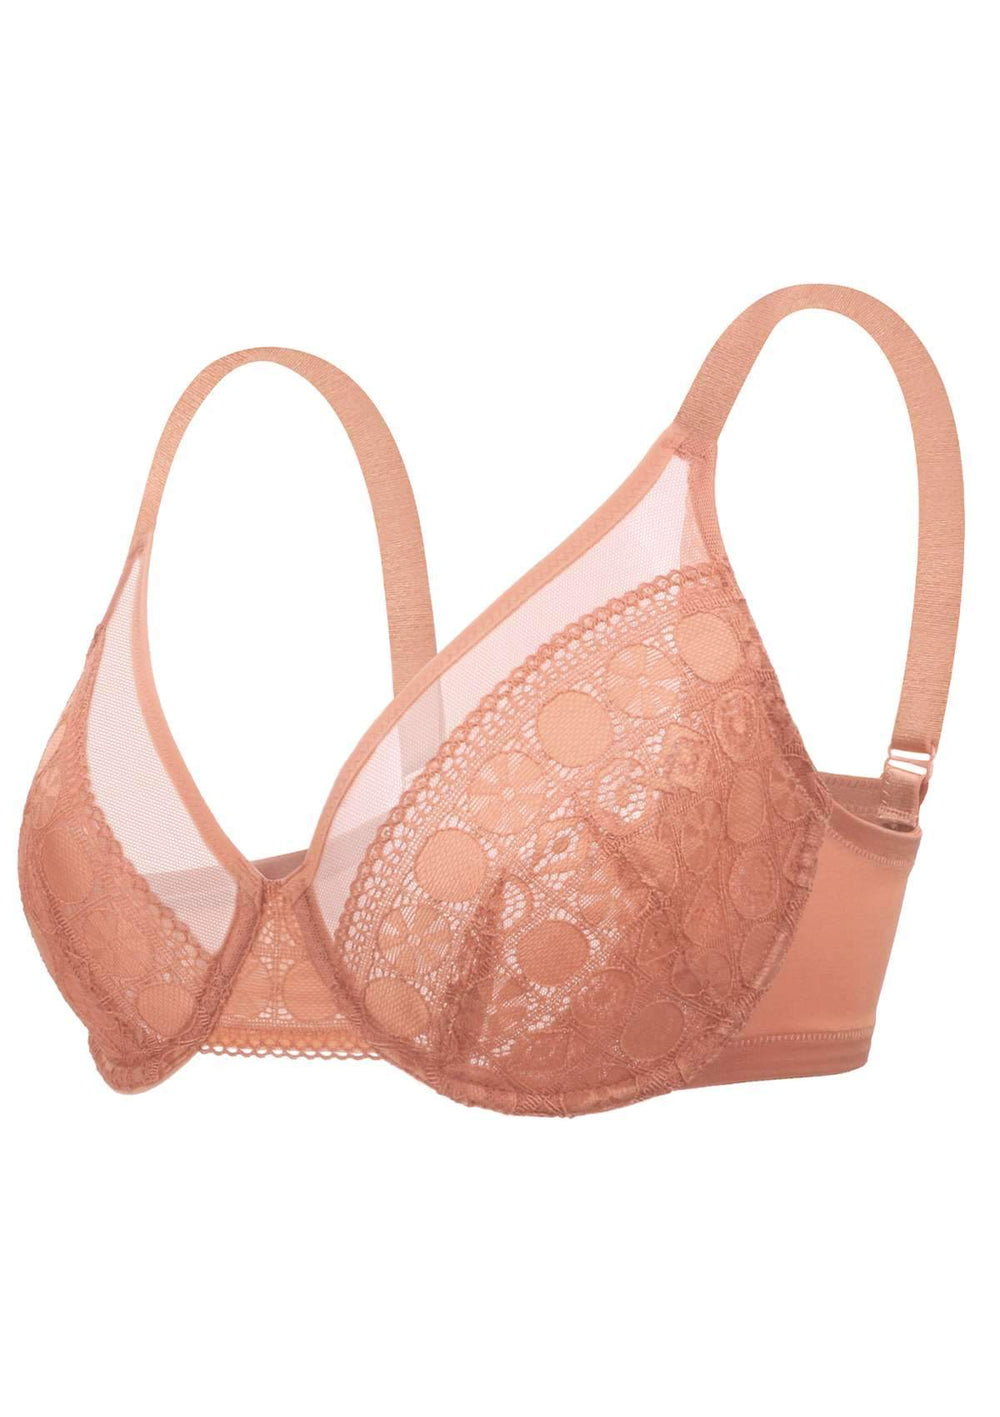 Susa 8071-249 Madeira Nude Striped Lace Non-Wired Spacer Bra 40B